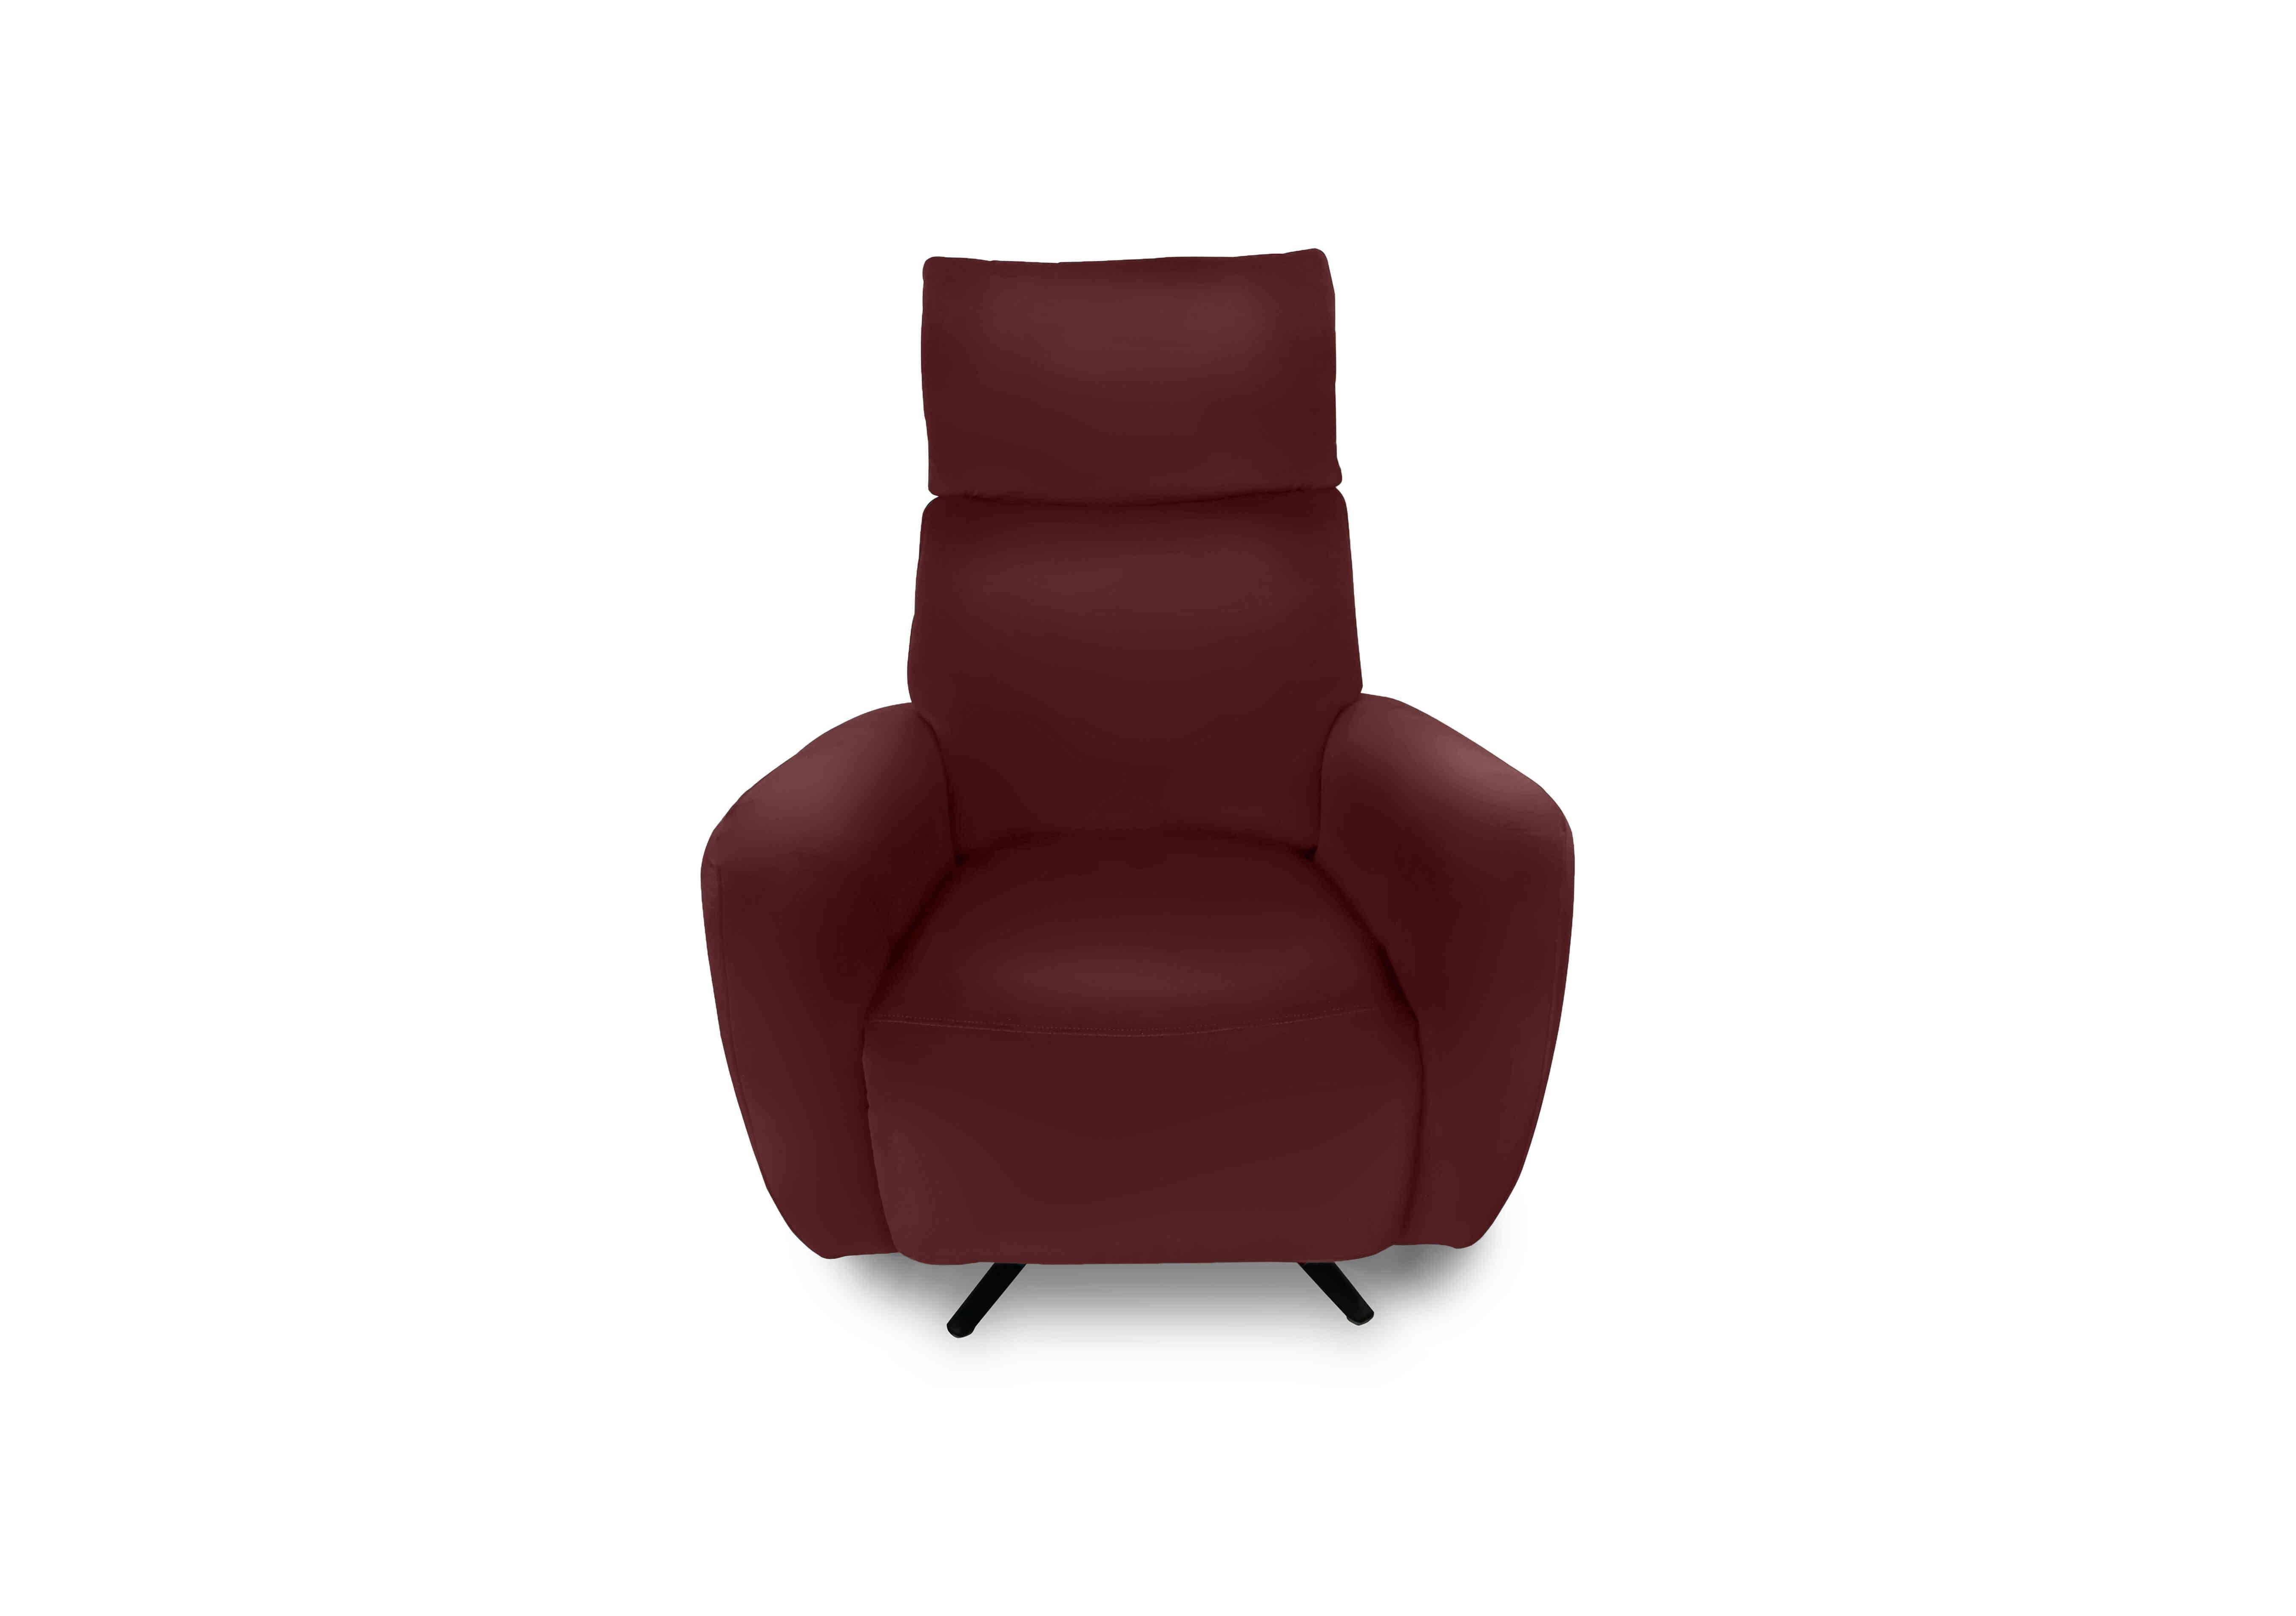 Designer Chair Collection Granada Leather Power Recliner Swivel Chair with Massage Feature in Bv-035c Deep Red on Furniture Village